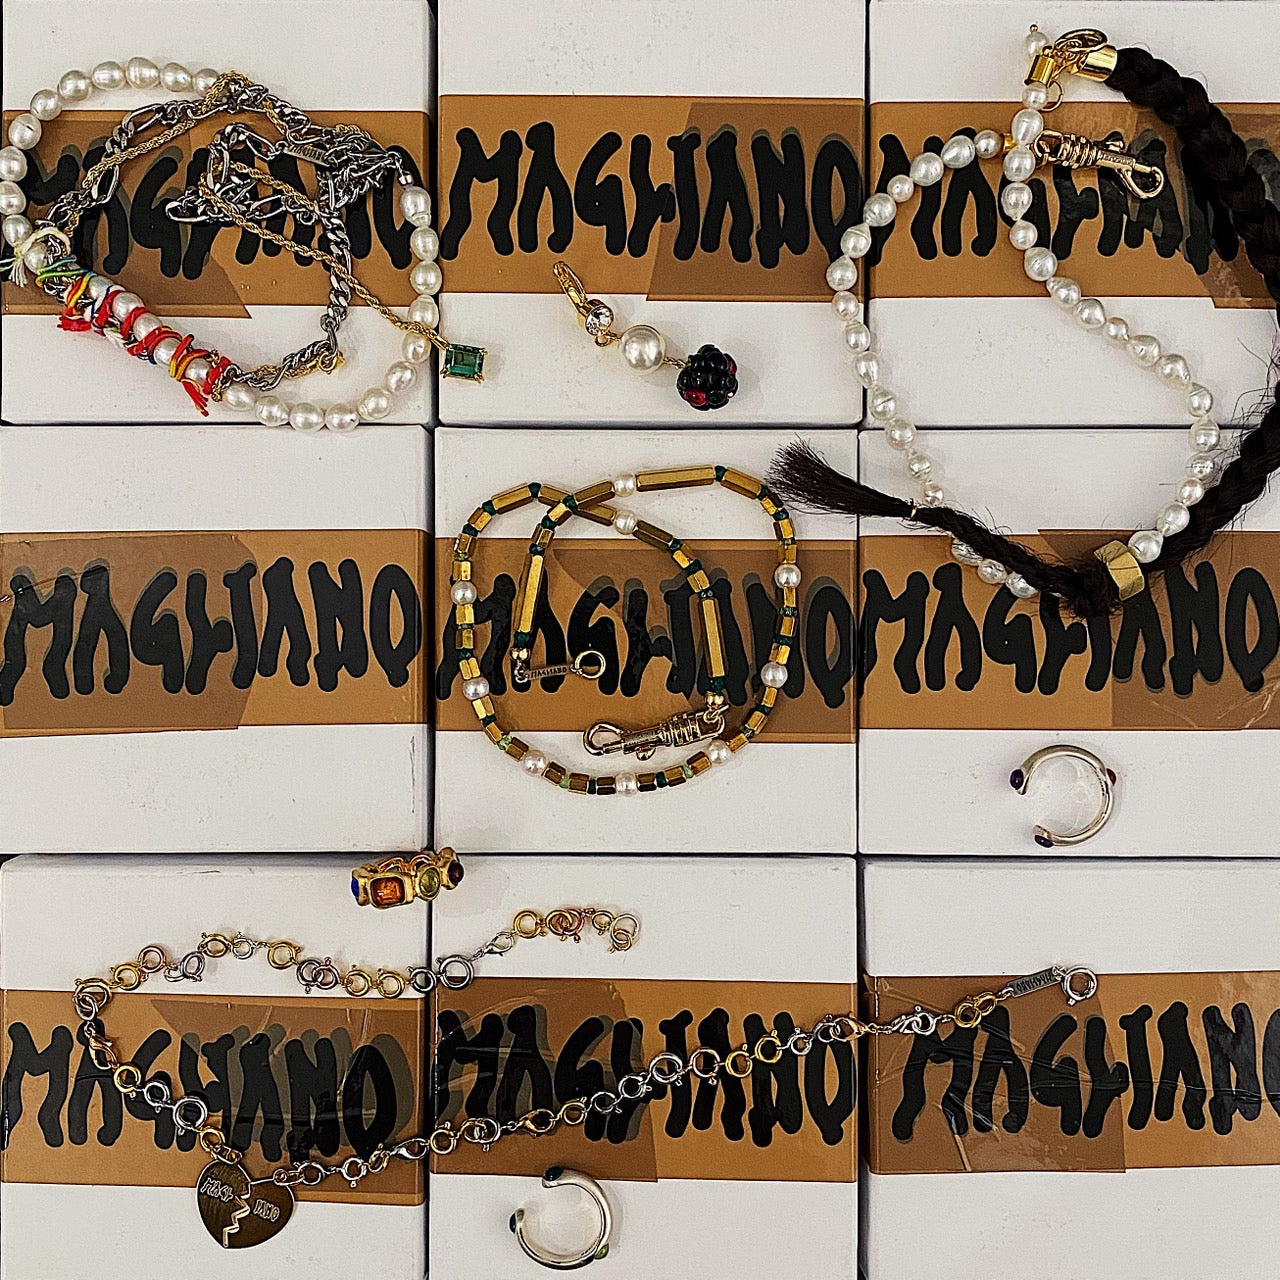 【Magliano】<br> A lineup of new items such as unique jewelry!